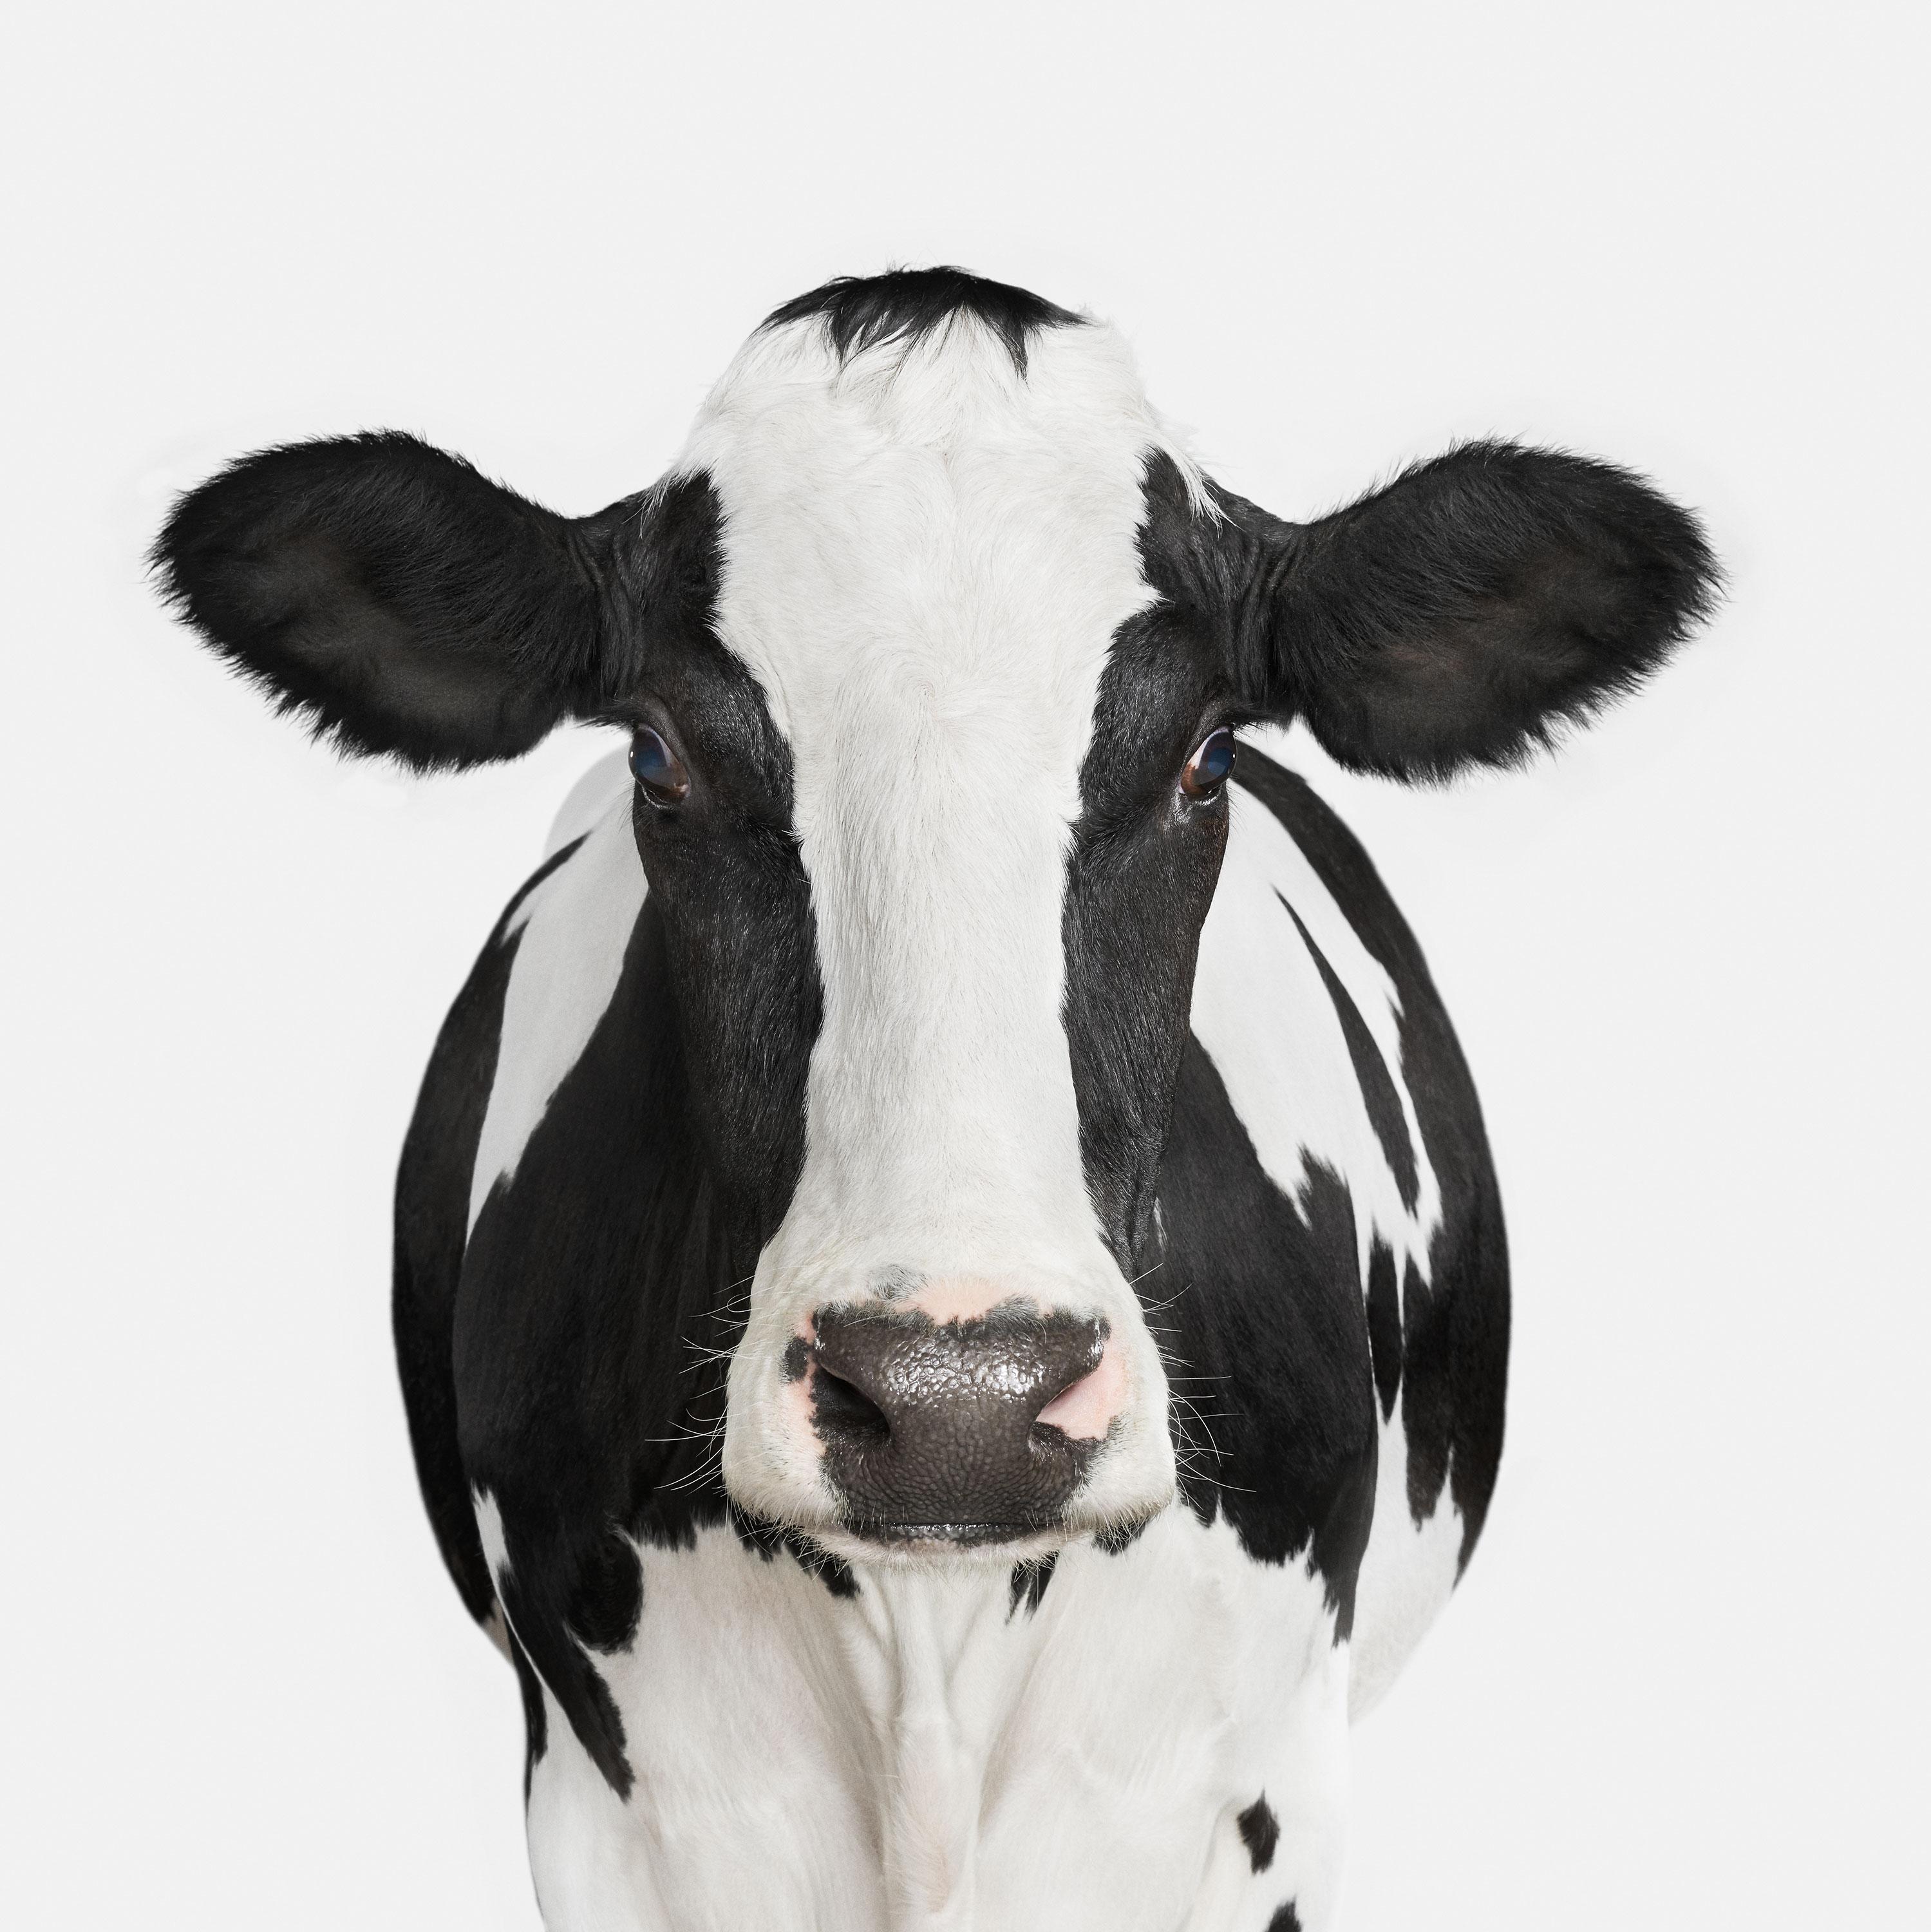 Available Sizes:
32" x 32" Edition of 15
40" x 40" Edition of 10
48" x 48" Edition of 5

Maxine: Maxine was calm, cool, and collected.  Cows were my first journey into the world of animal photography and they are still my favorite subjects. She’s